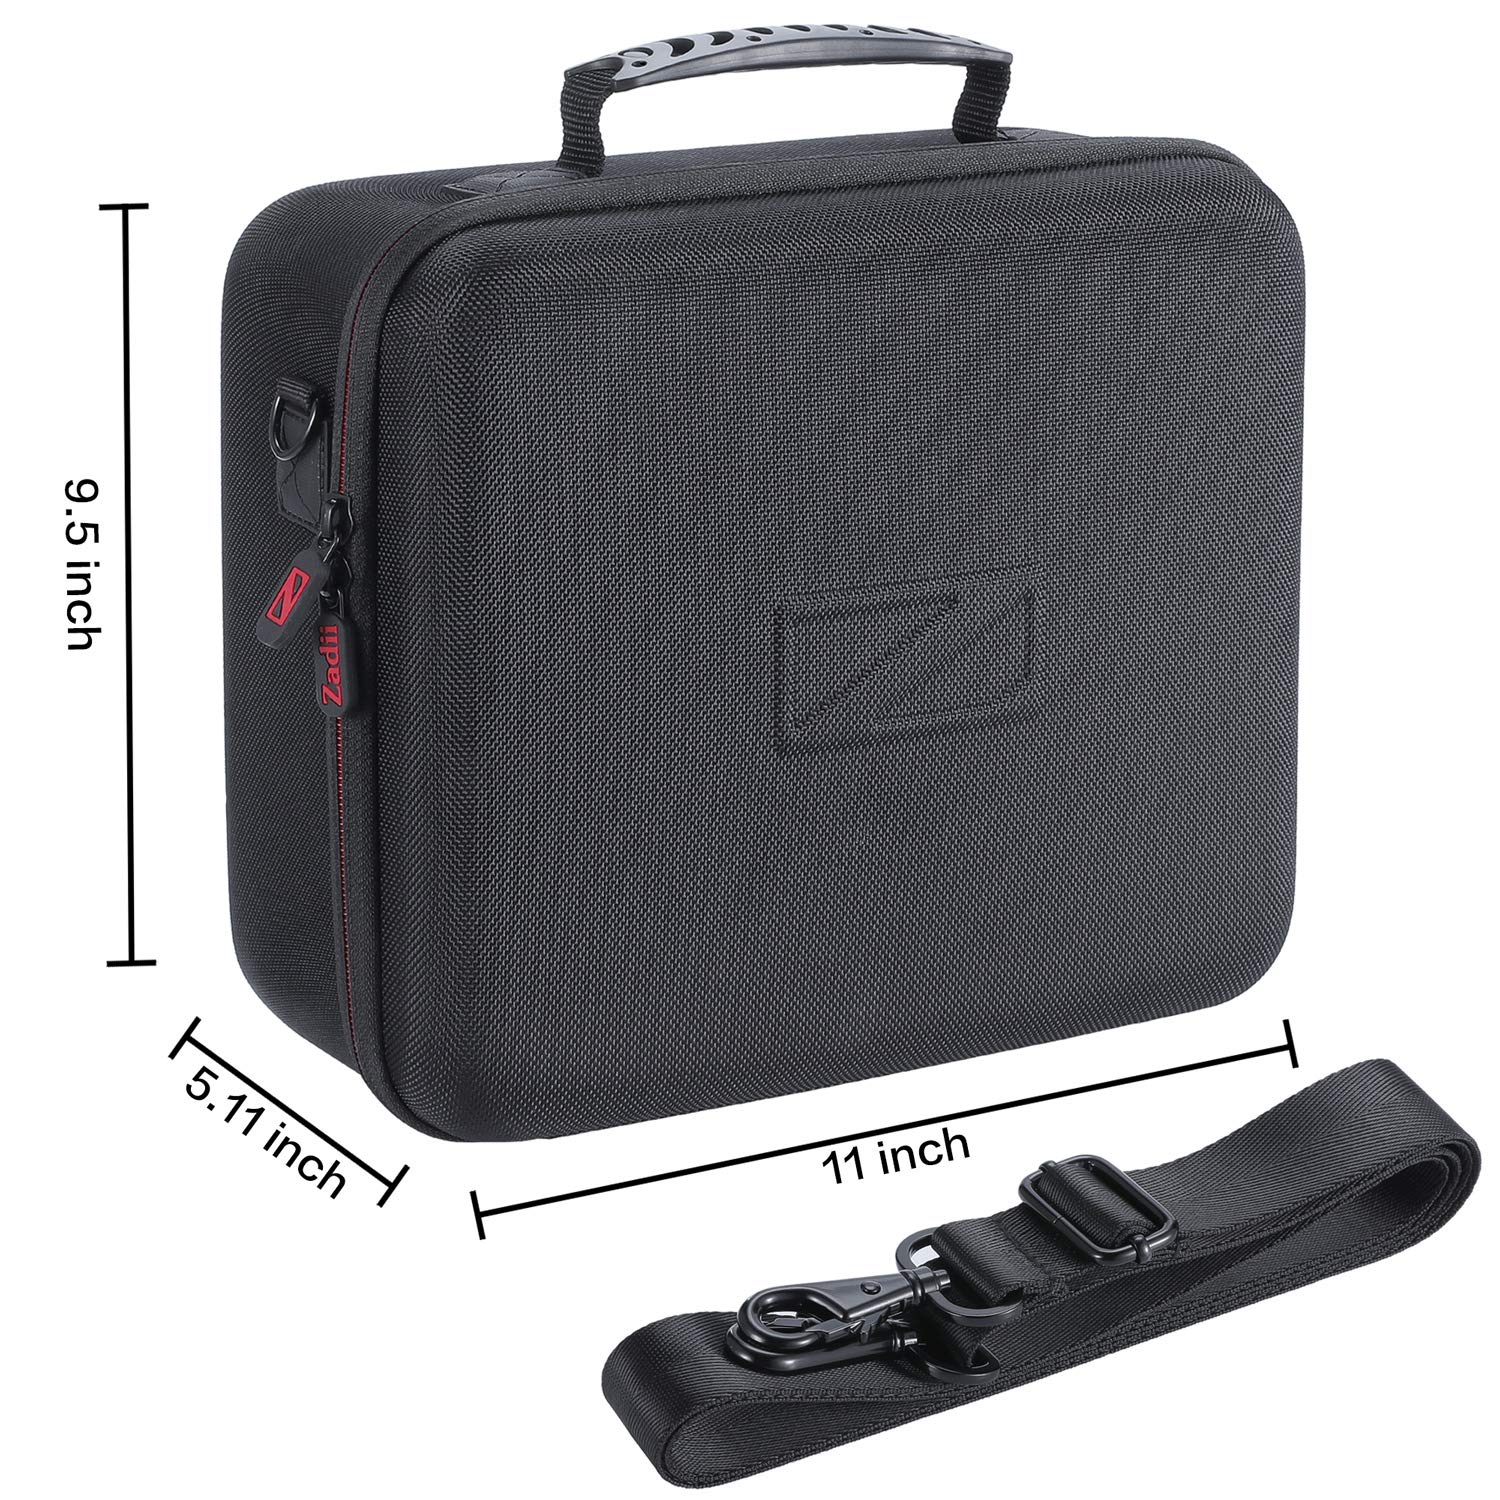 Zadii Hard Carrying Case Compatible with Nintendo Switch, Travel Case Fit Switch Pro Controller